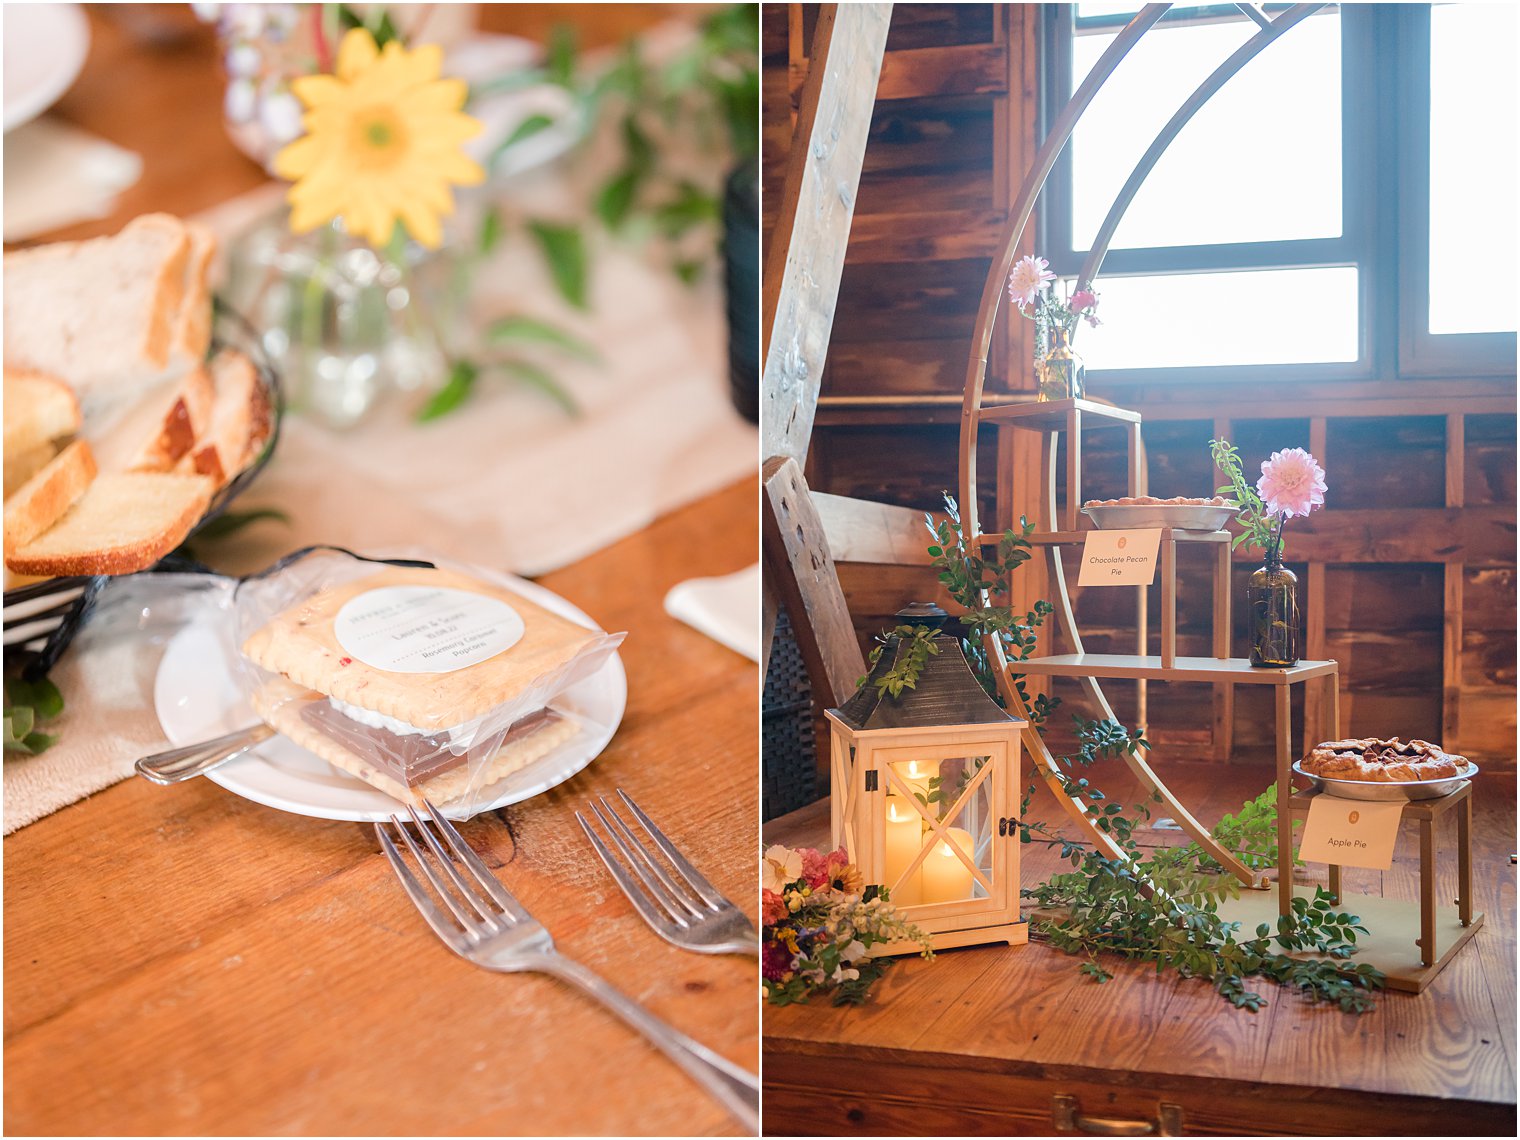 rustic wedding reception place setting and cake display